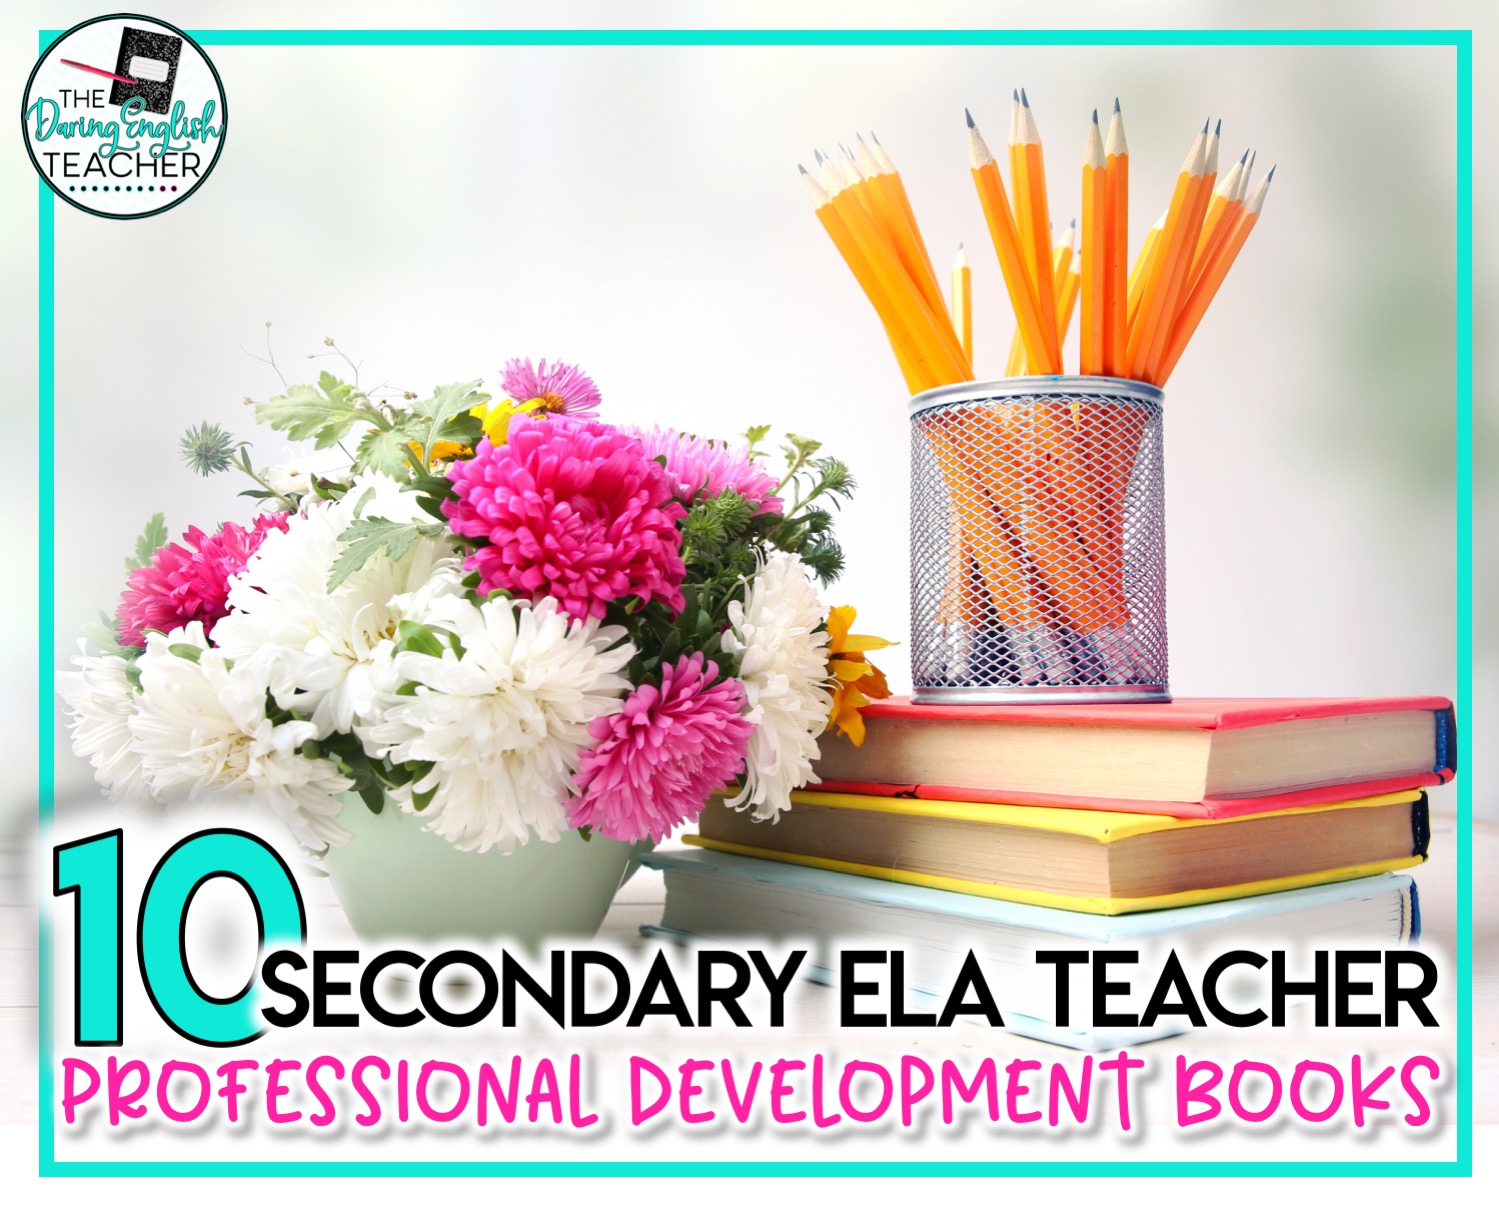 Secondary ELA Teacher Professional Development Books: 10 Recommendations to Boost Your Teaching